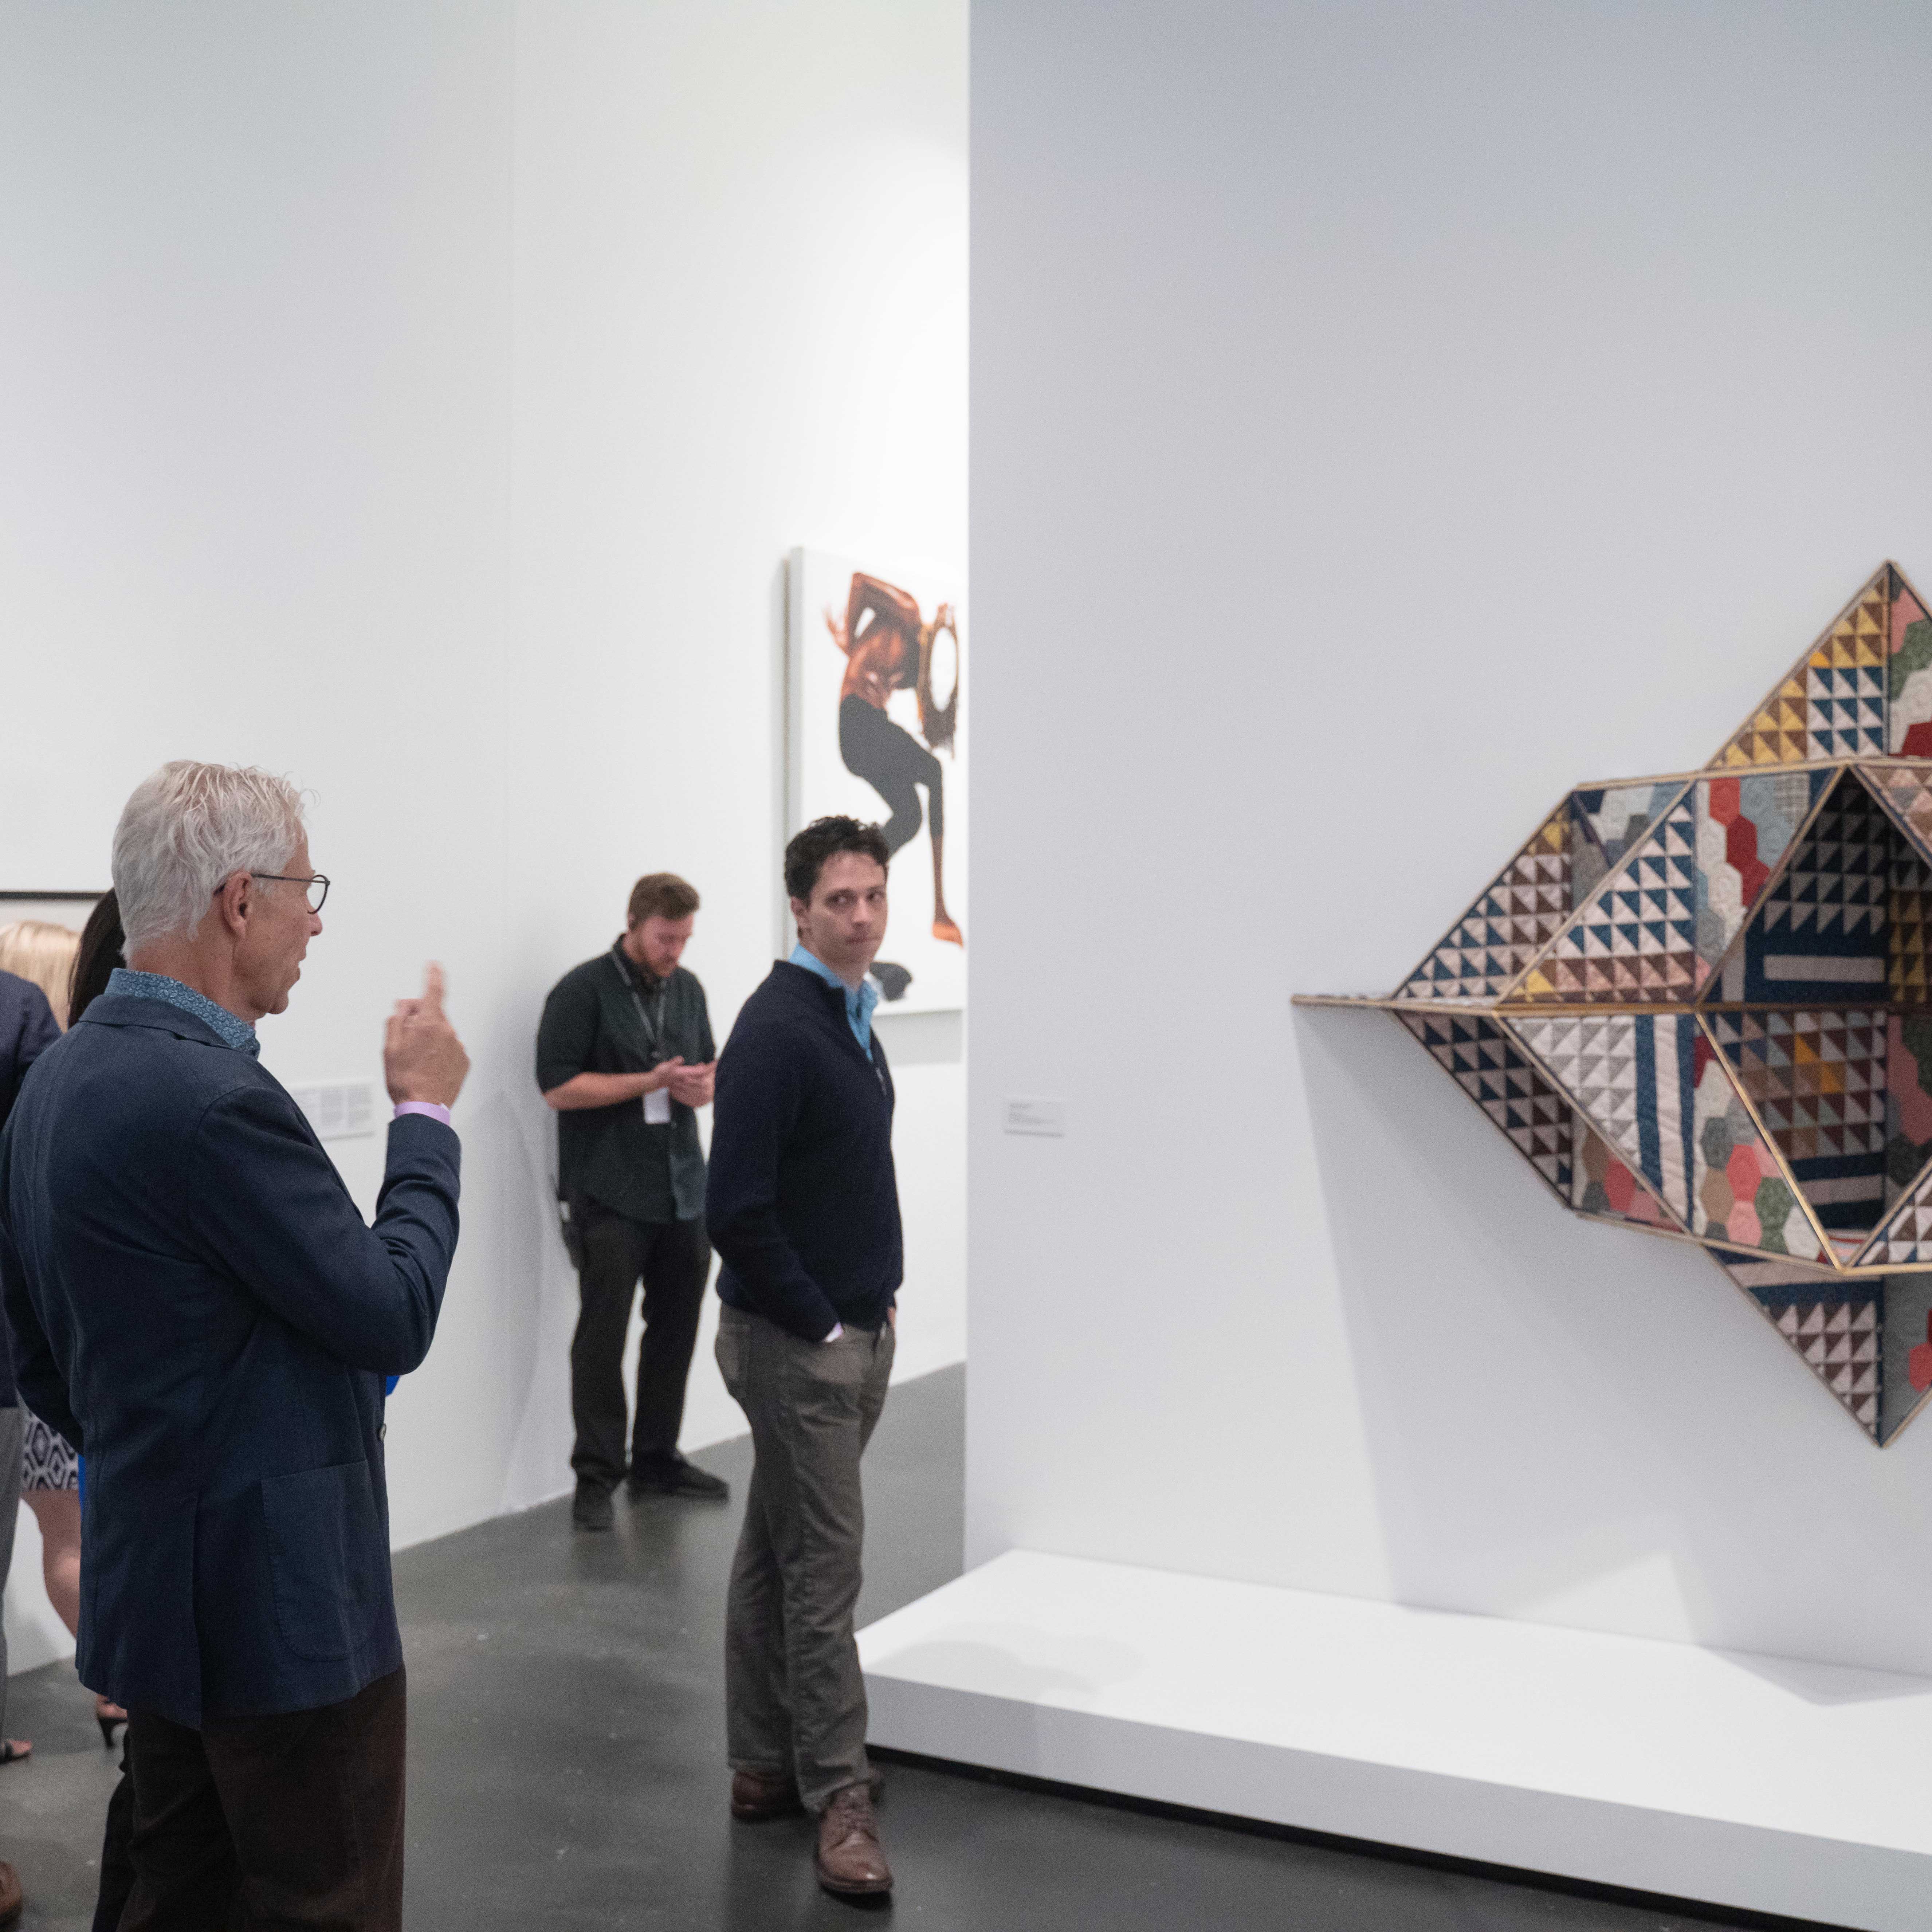 Visitors standing near a quilt that it's a geometric shape and affixed to the wall. 